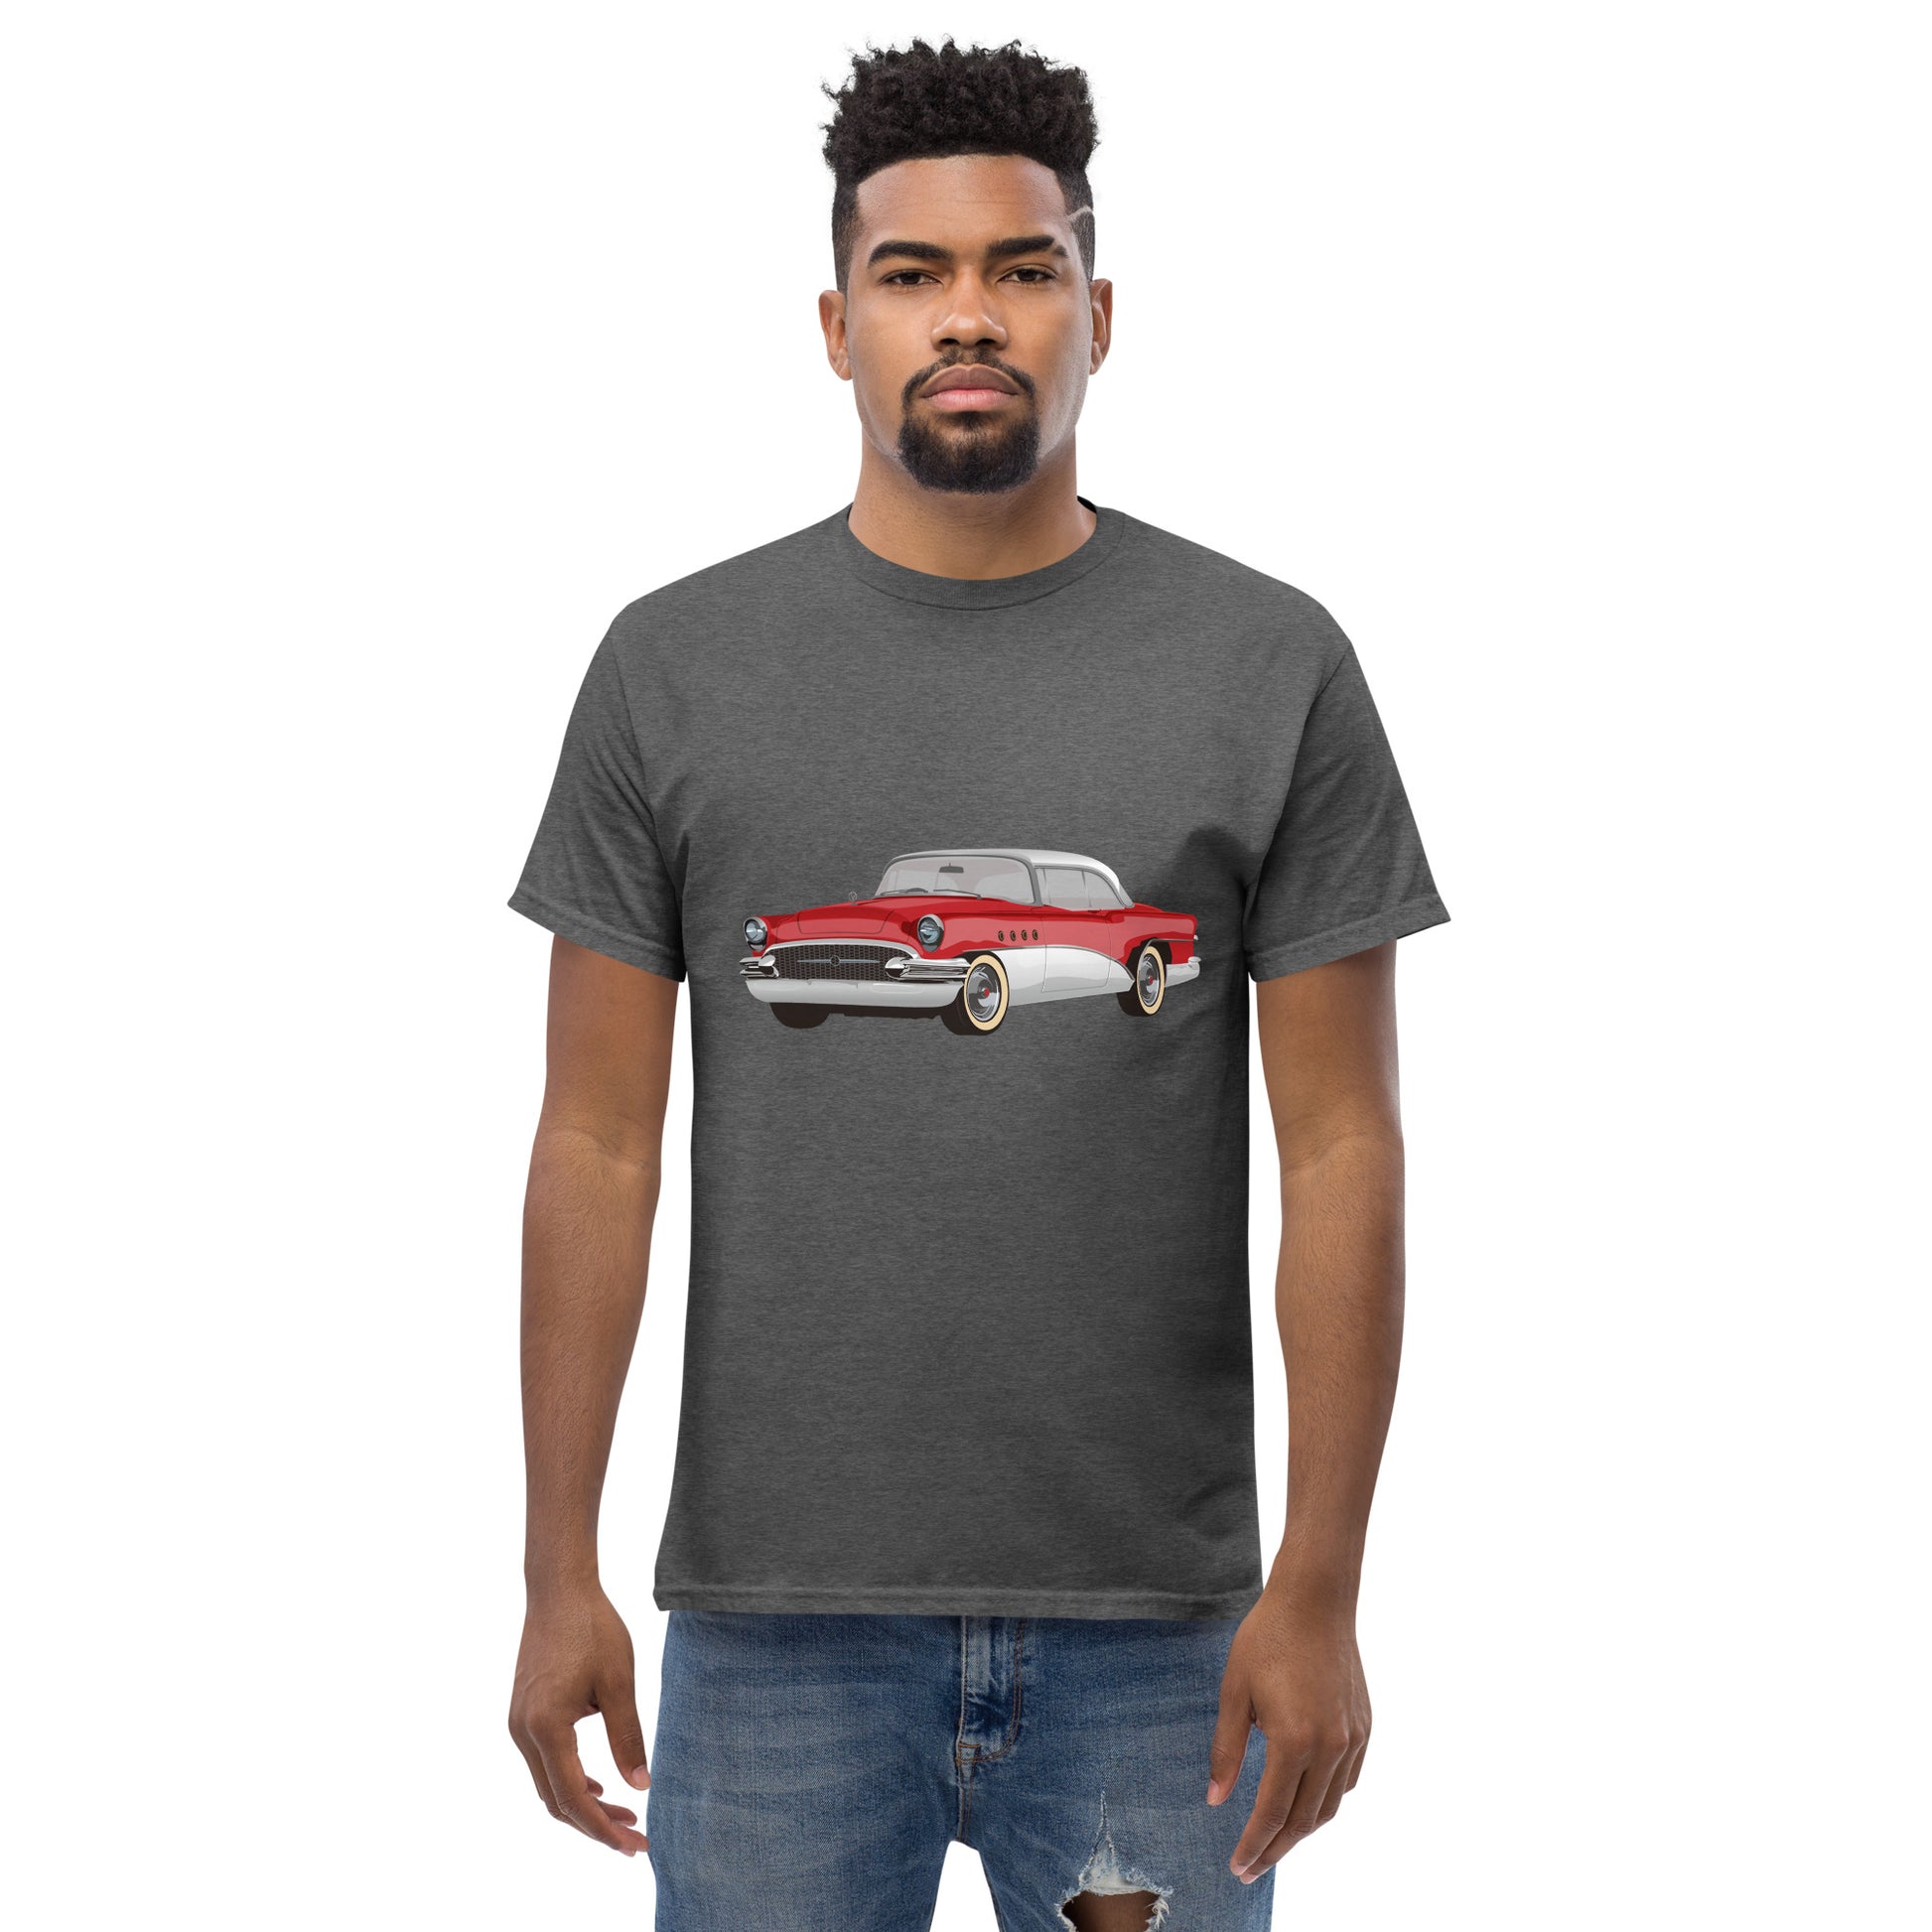 Men with grey t-shirt with red Chevrolet 